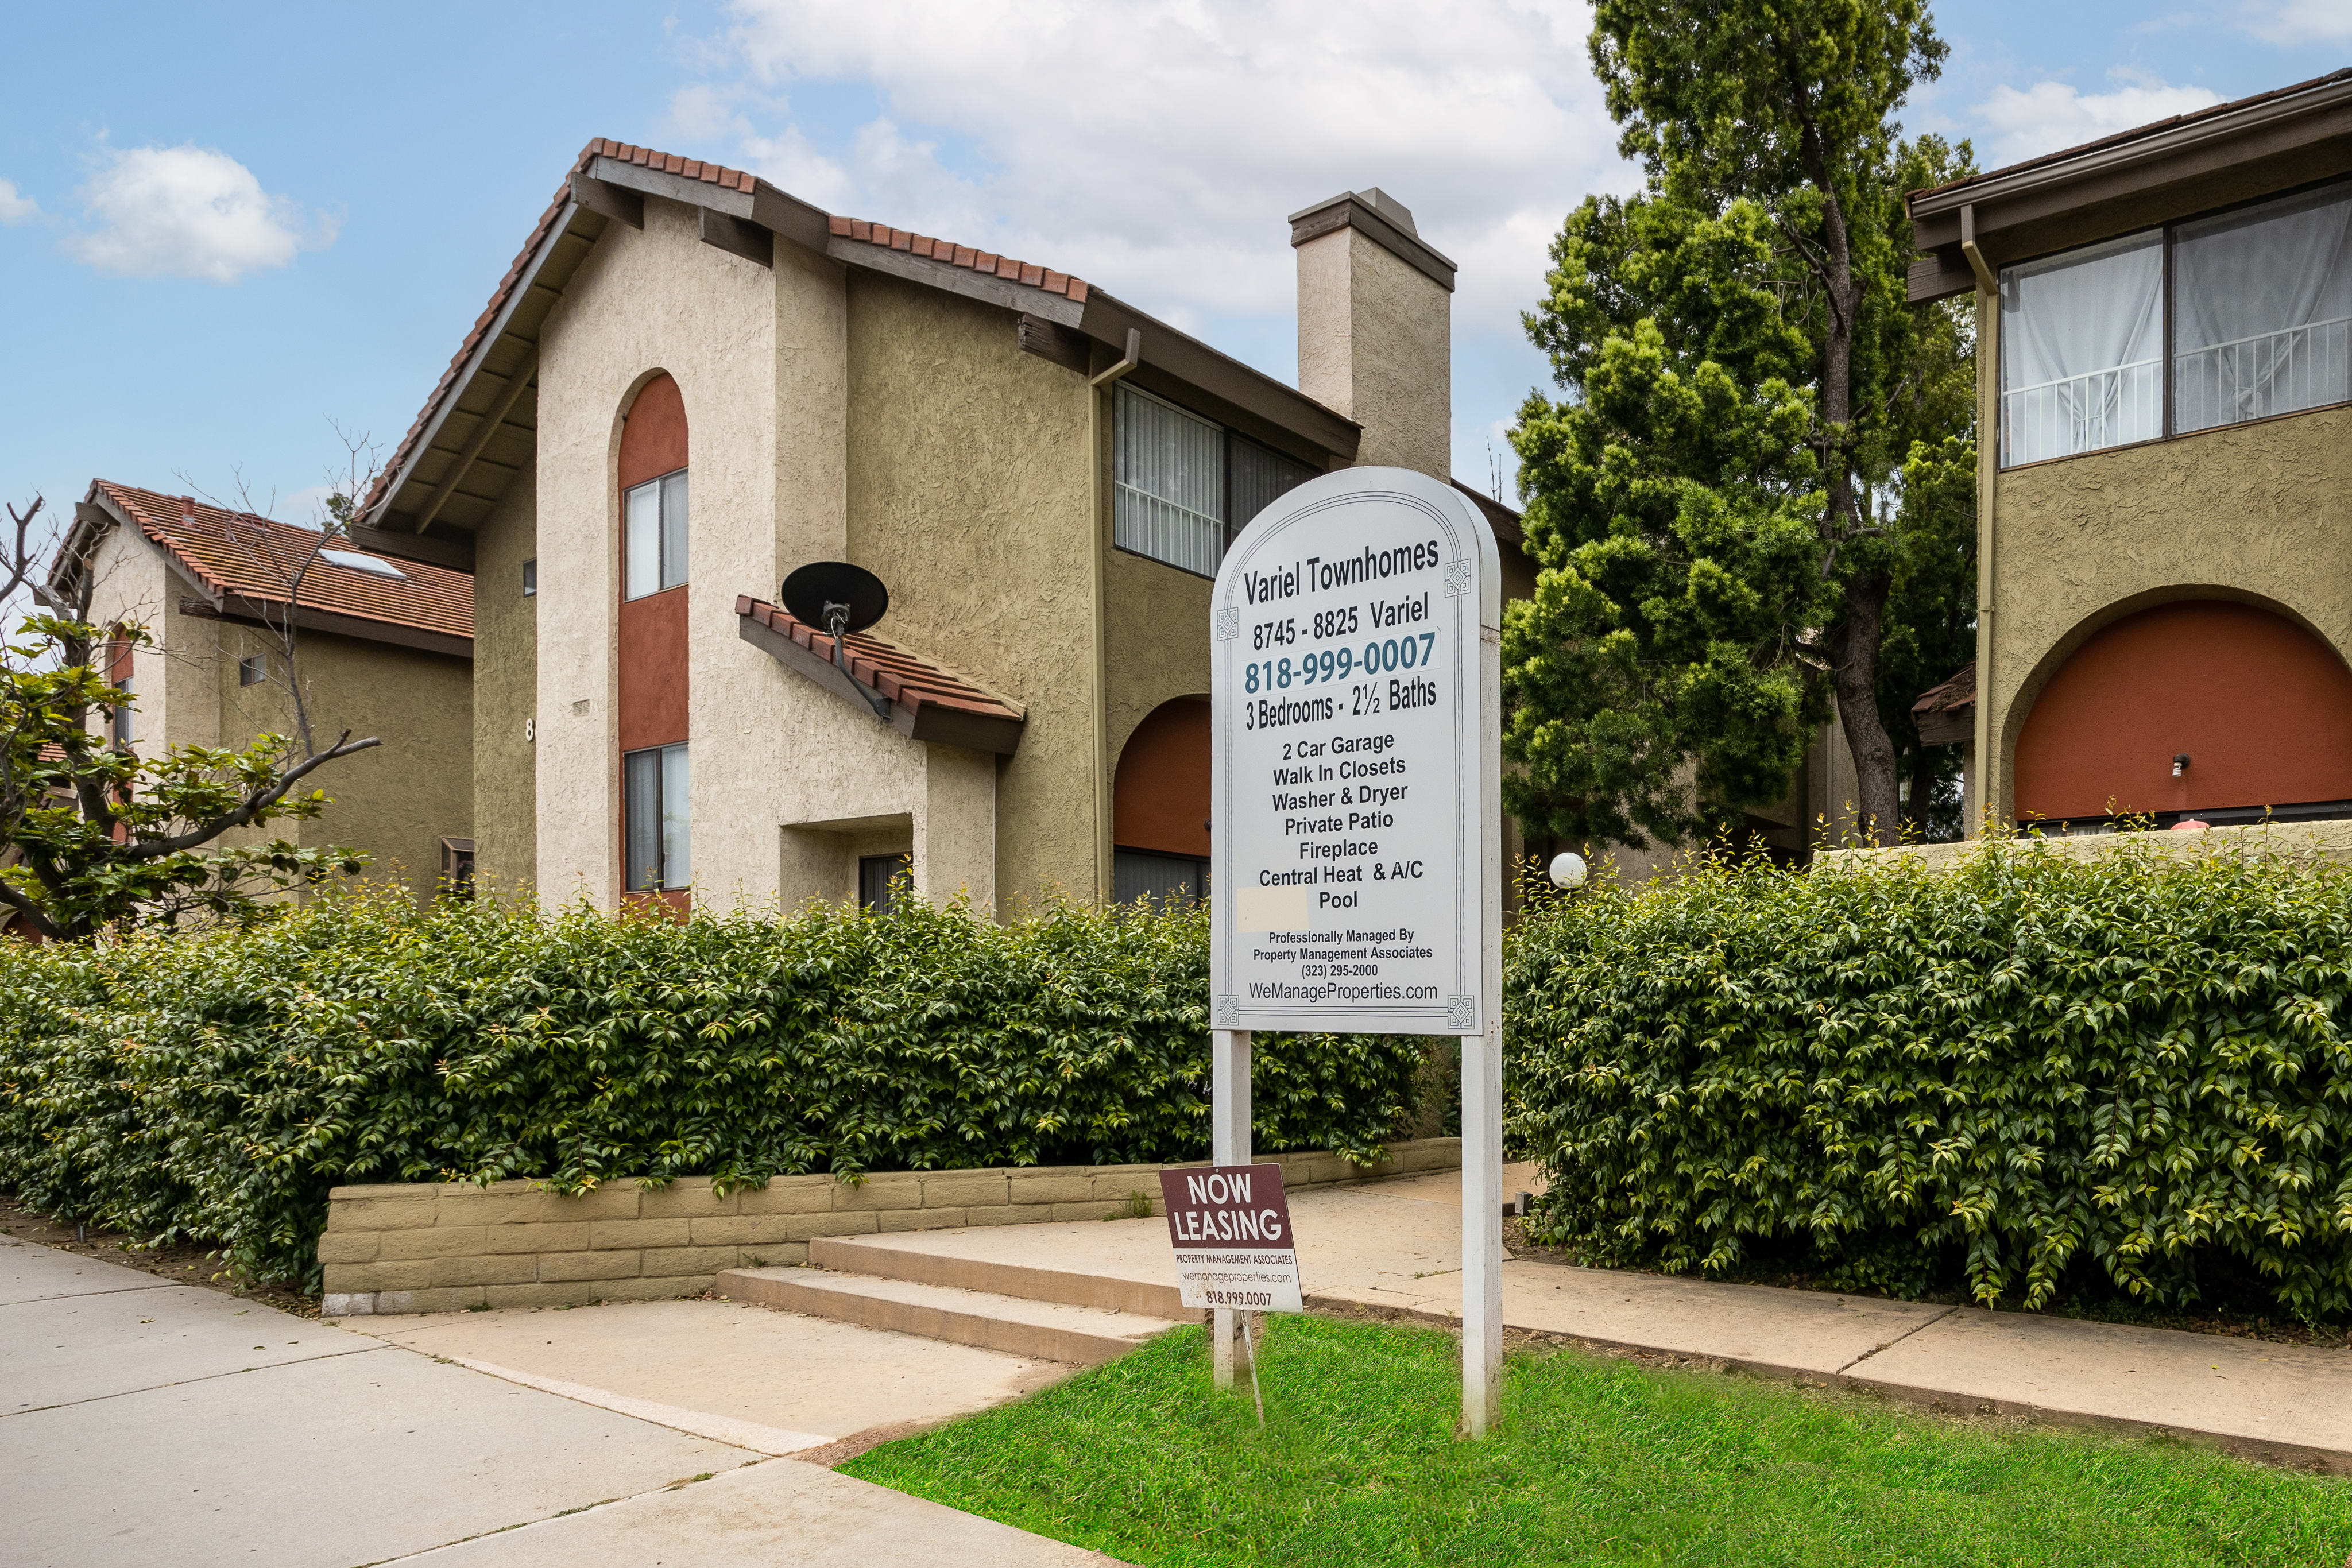 Map and Directions to Variel Villas in Canoga Park, CA